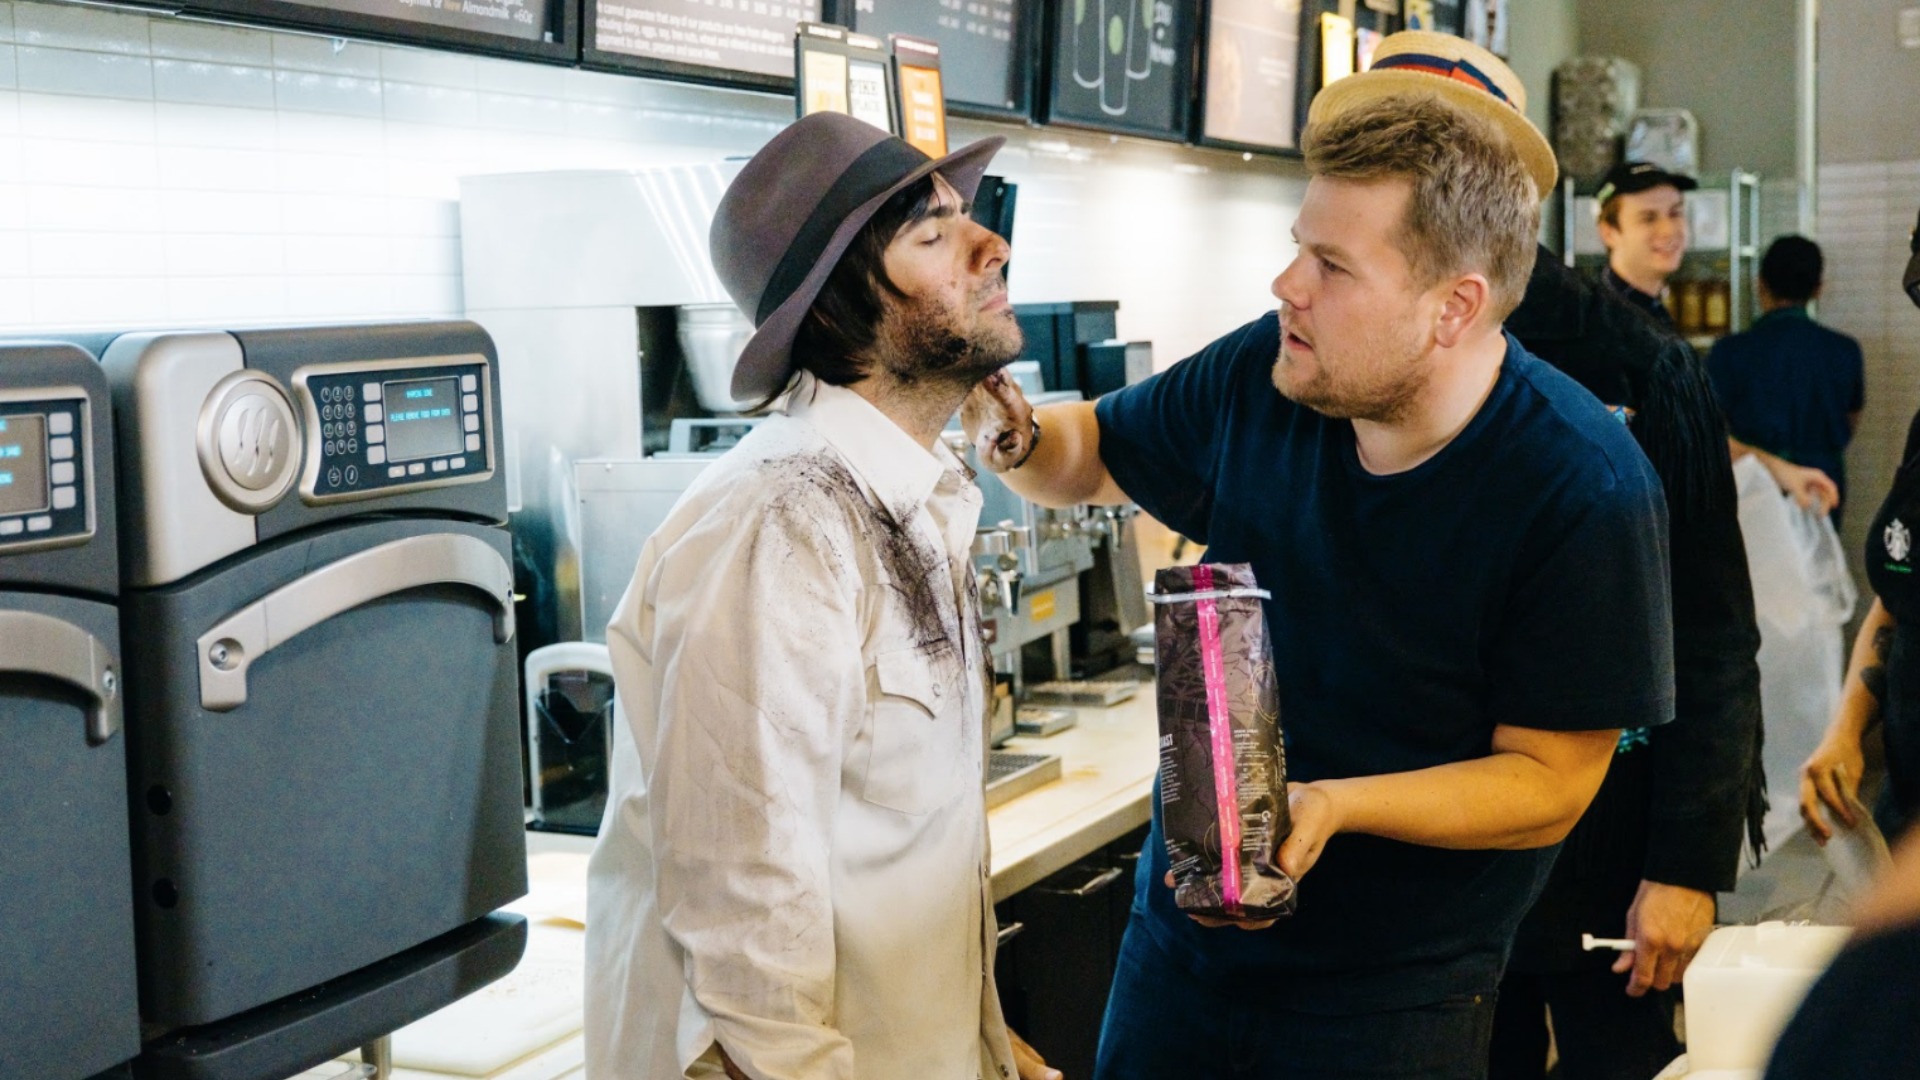 James gently applies a healthy dose of ground coffee to Jason's face.